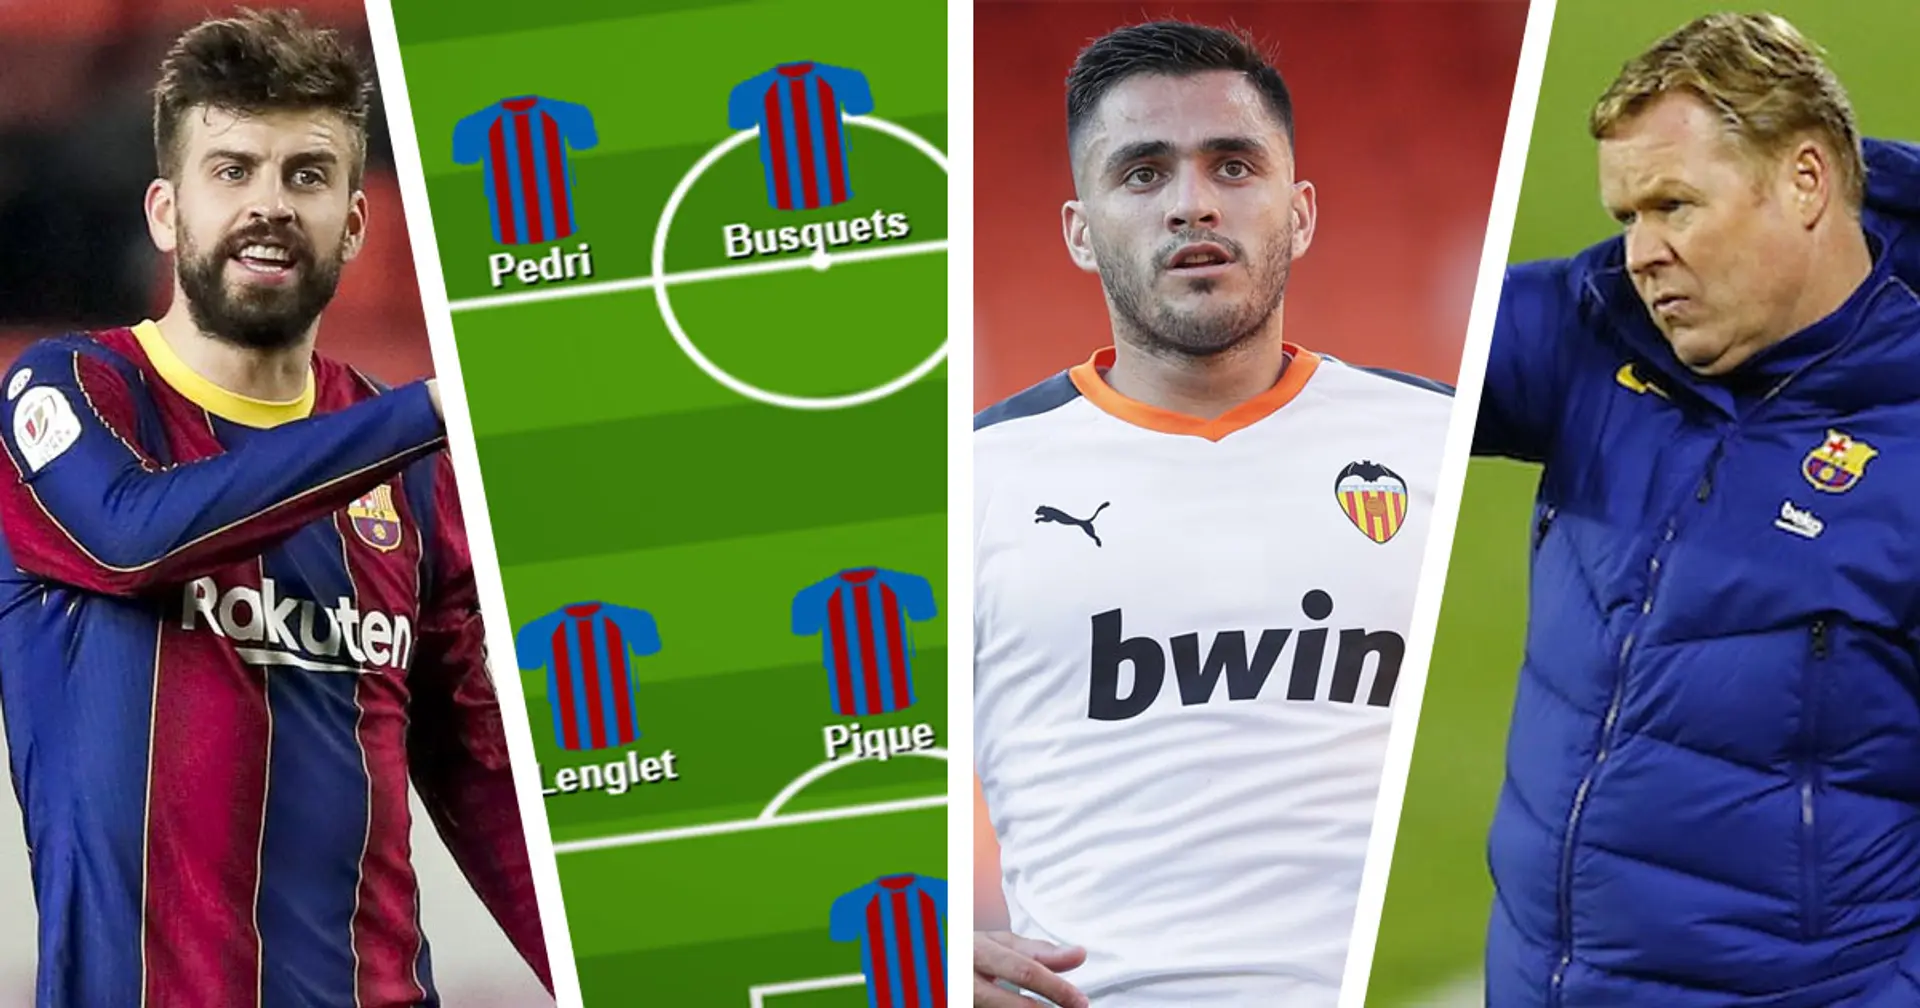 Barcelona's XI vs Valencia's likely XI: which area will decide the outcome of the game